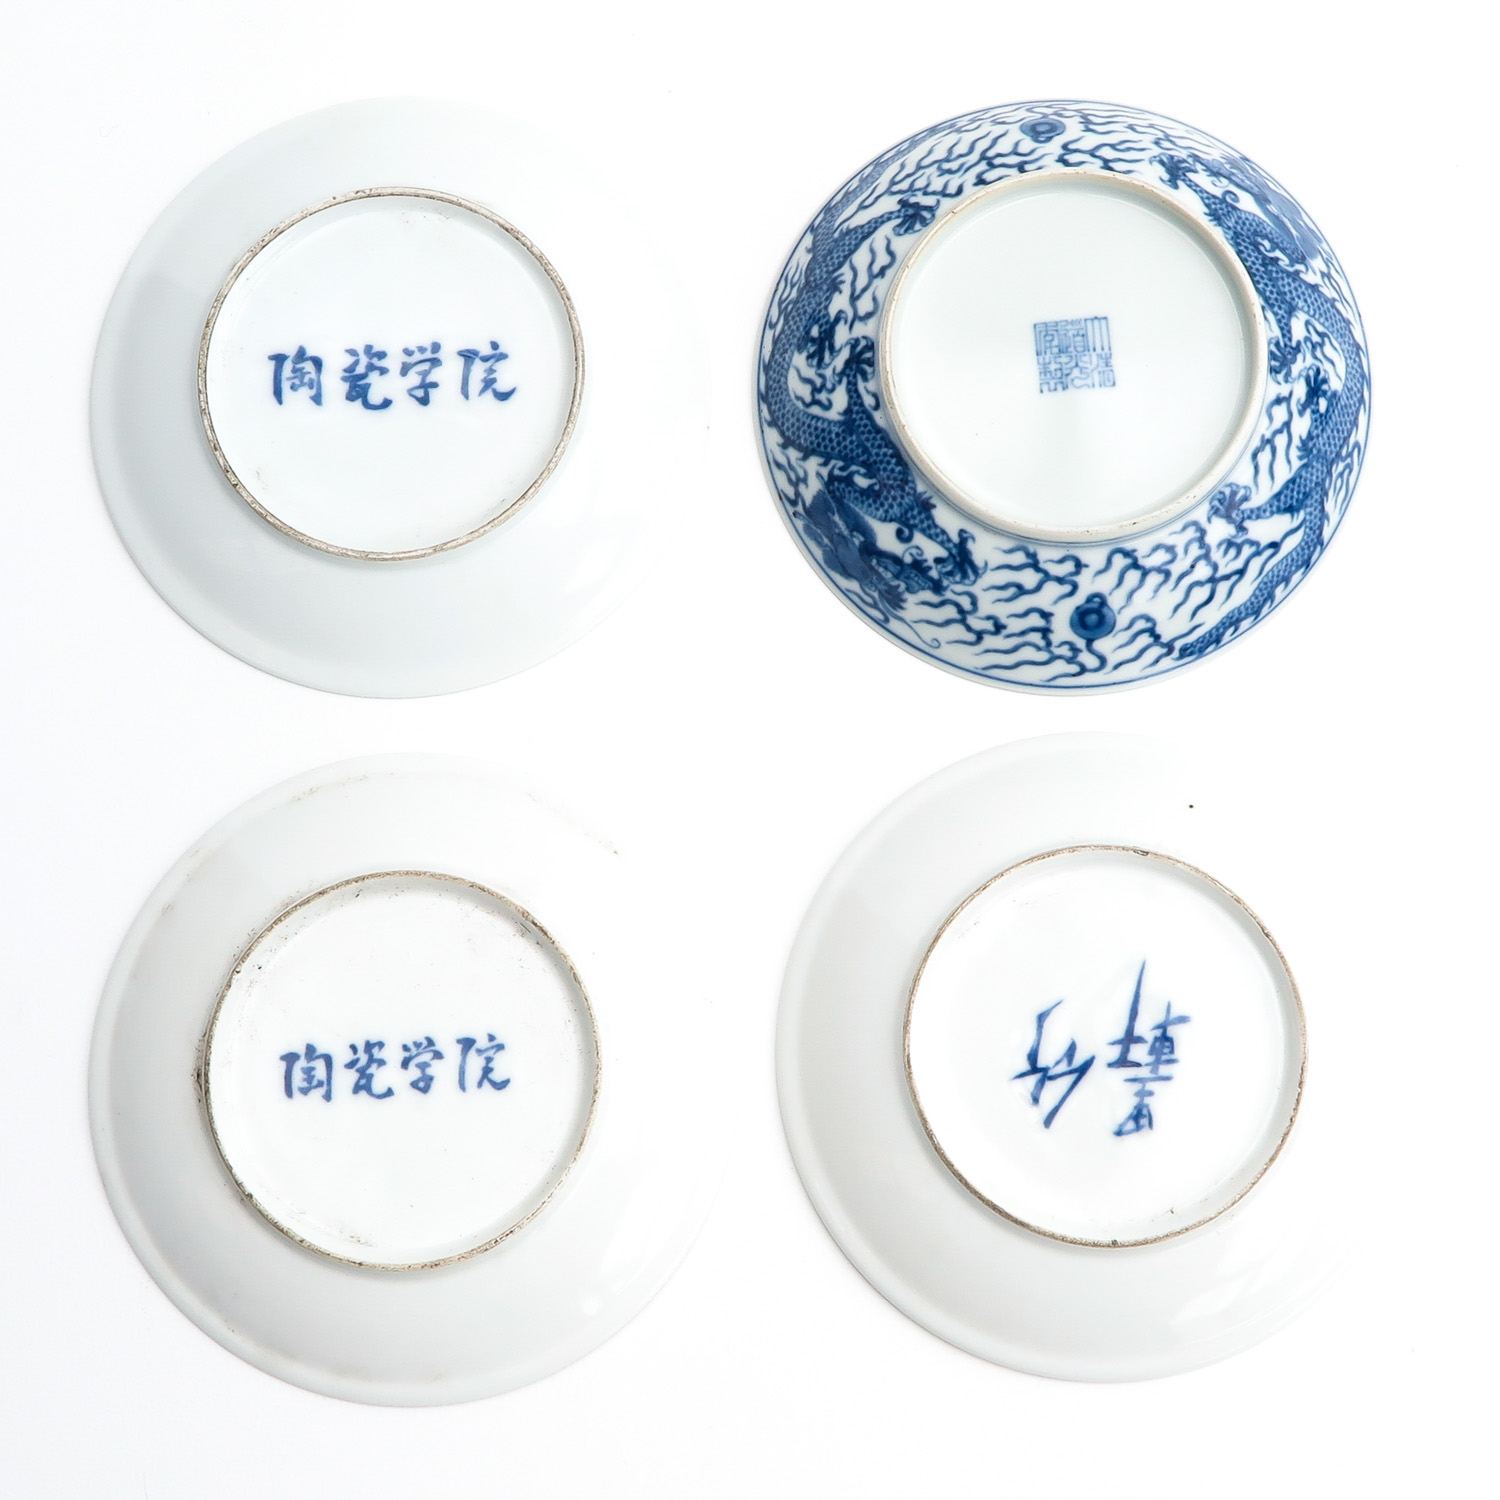 A Collection of 4 Plates - Image 2 of 10